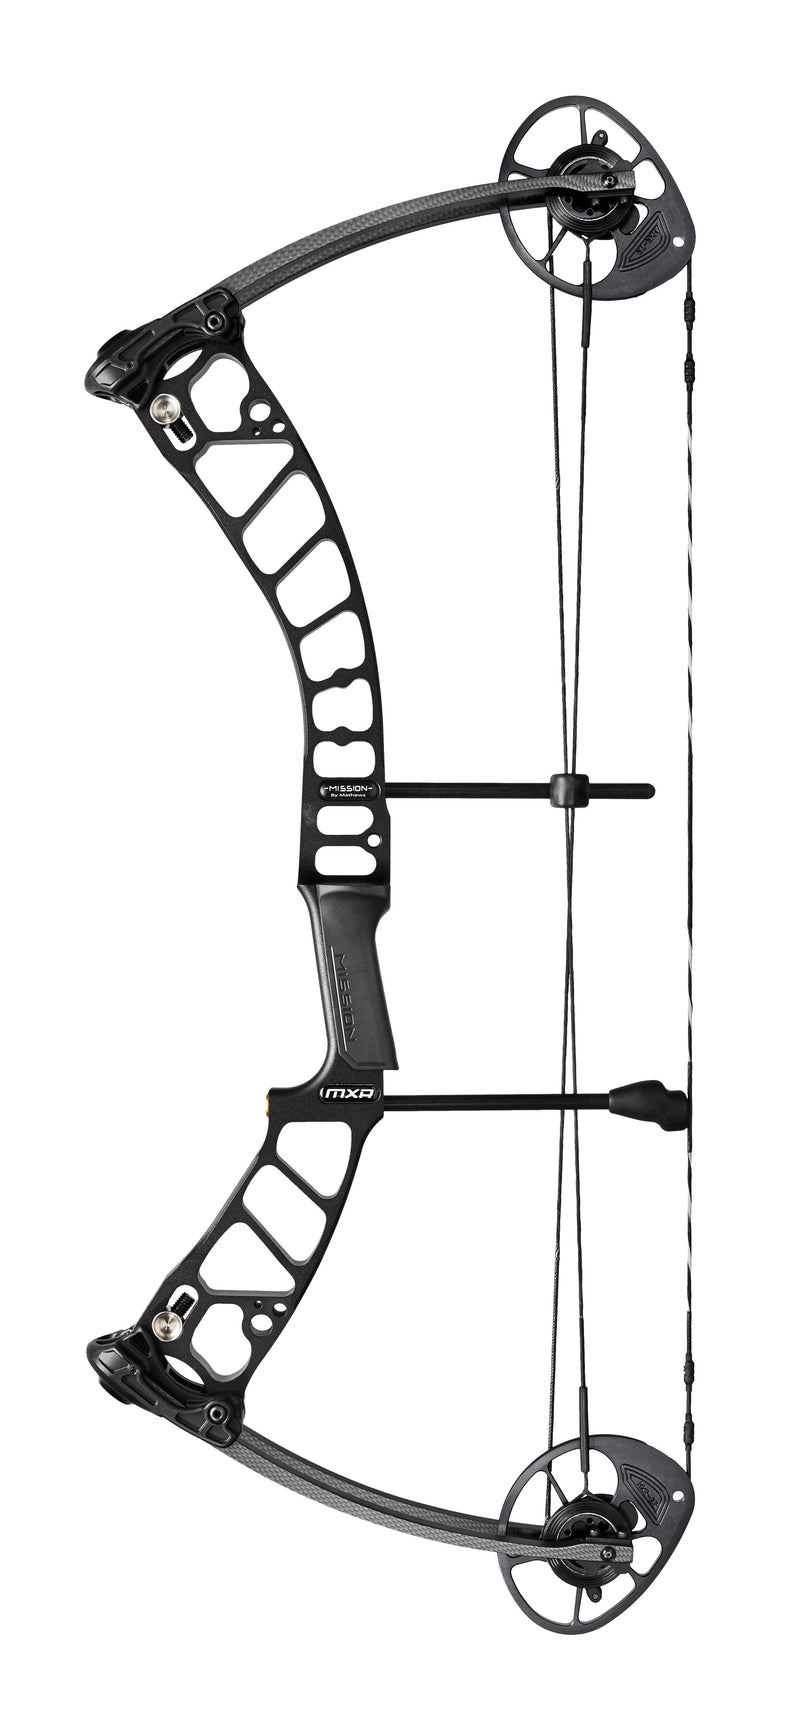 MISSION - MXR COMPOUND BOW ONLY